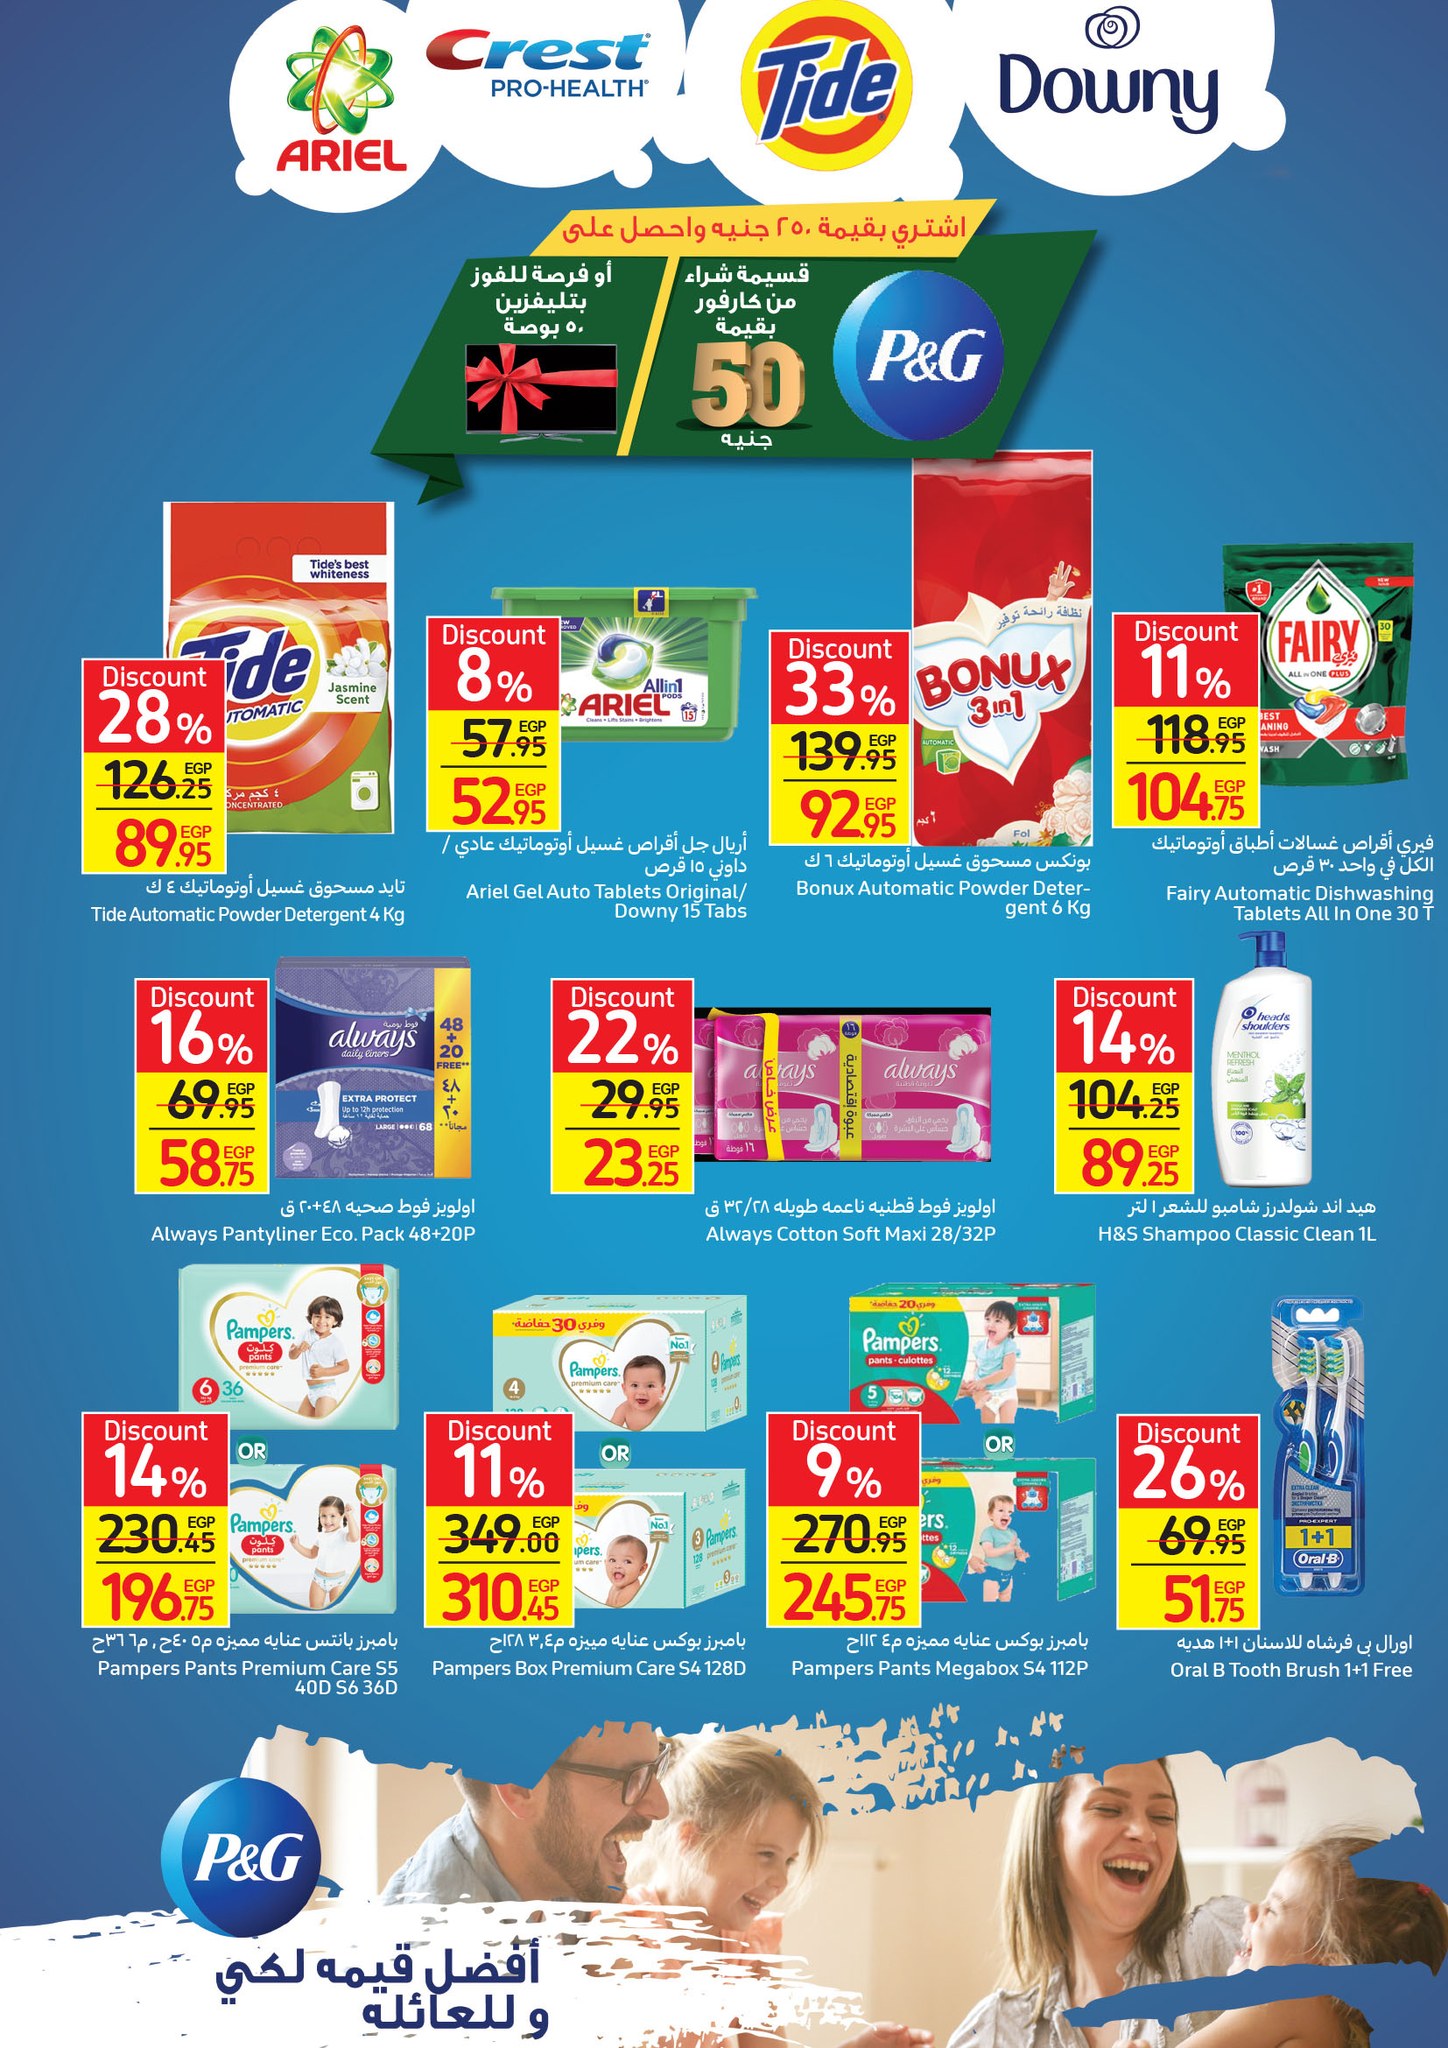 Watch the latest Carrefour half price offers "Last Chance Offer" until December 4th 38